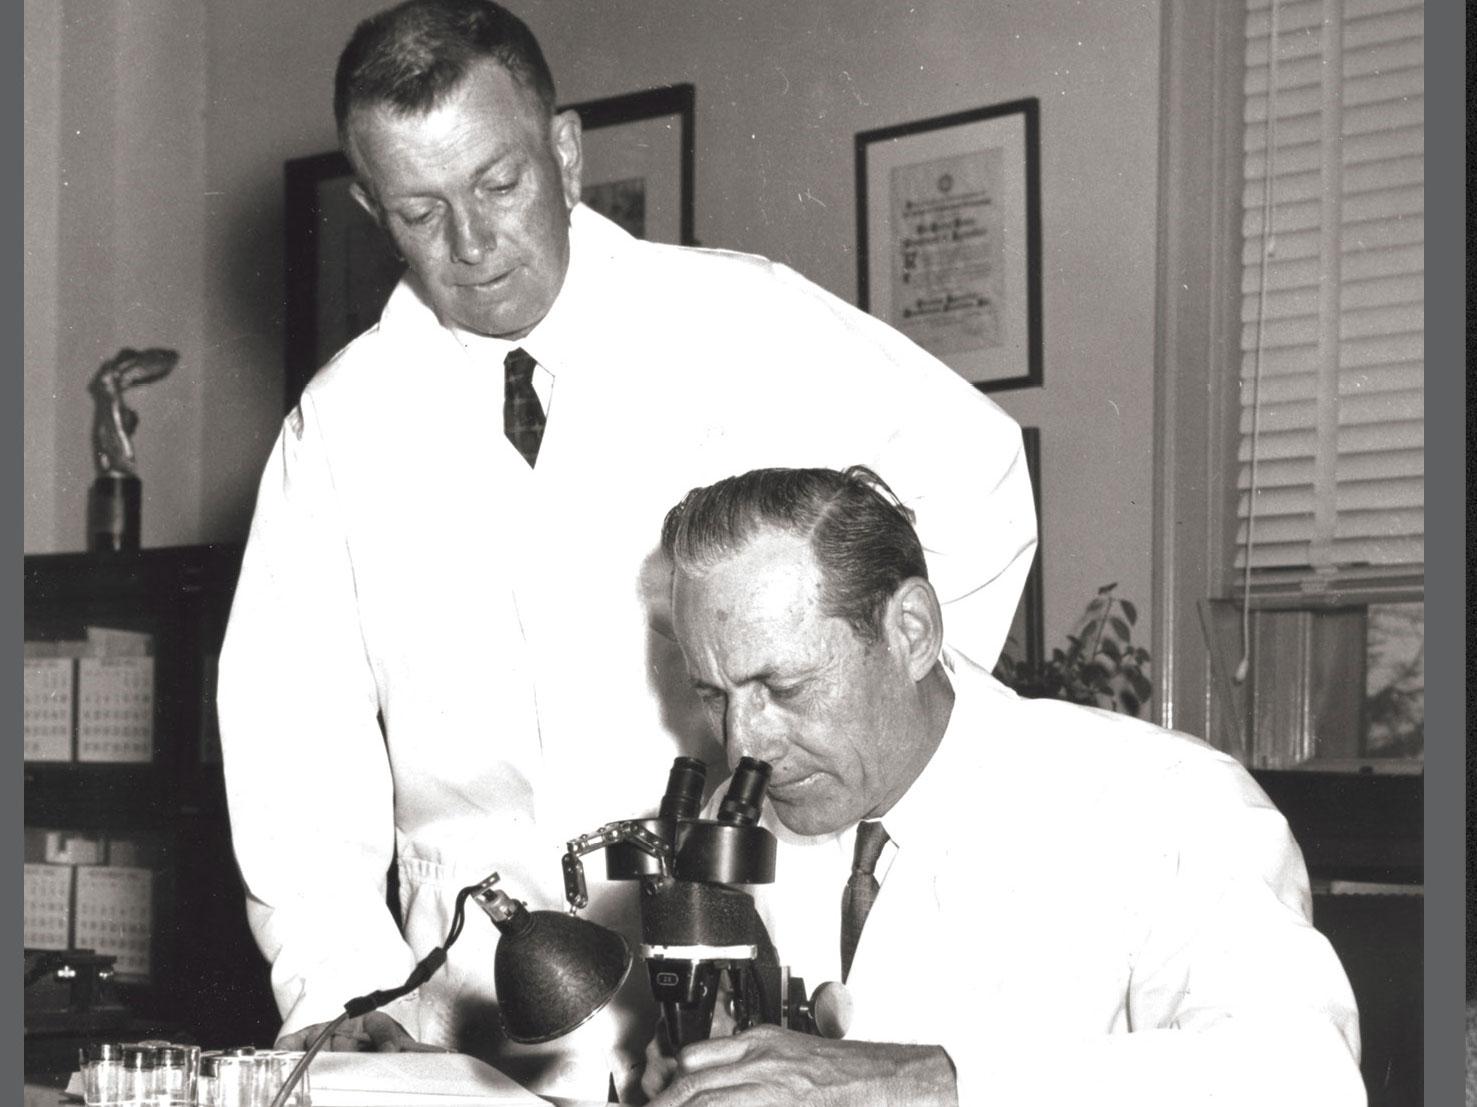 Dr Raymond Bushland (standing) and Dr Edward Knipling